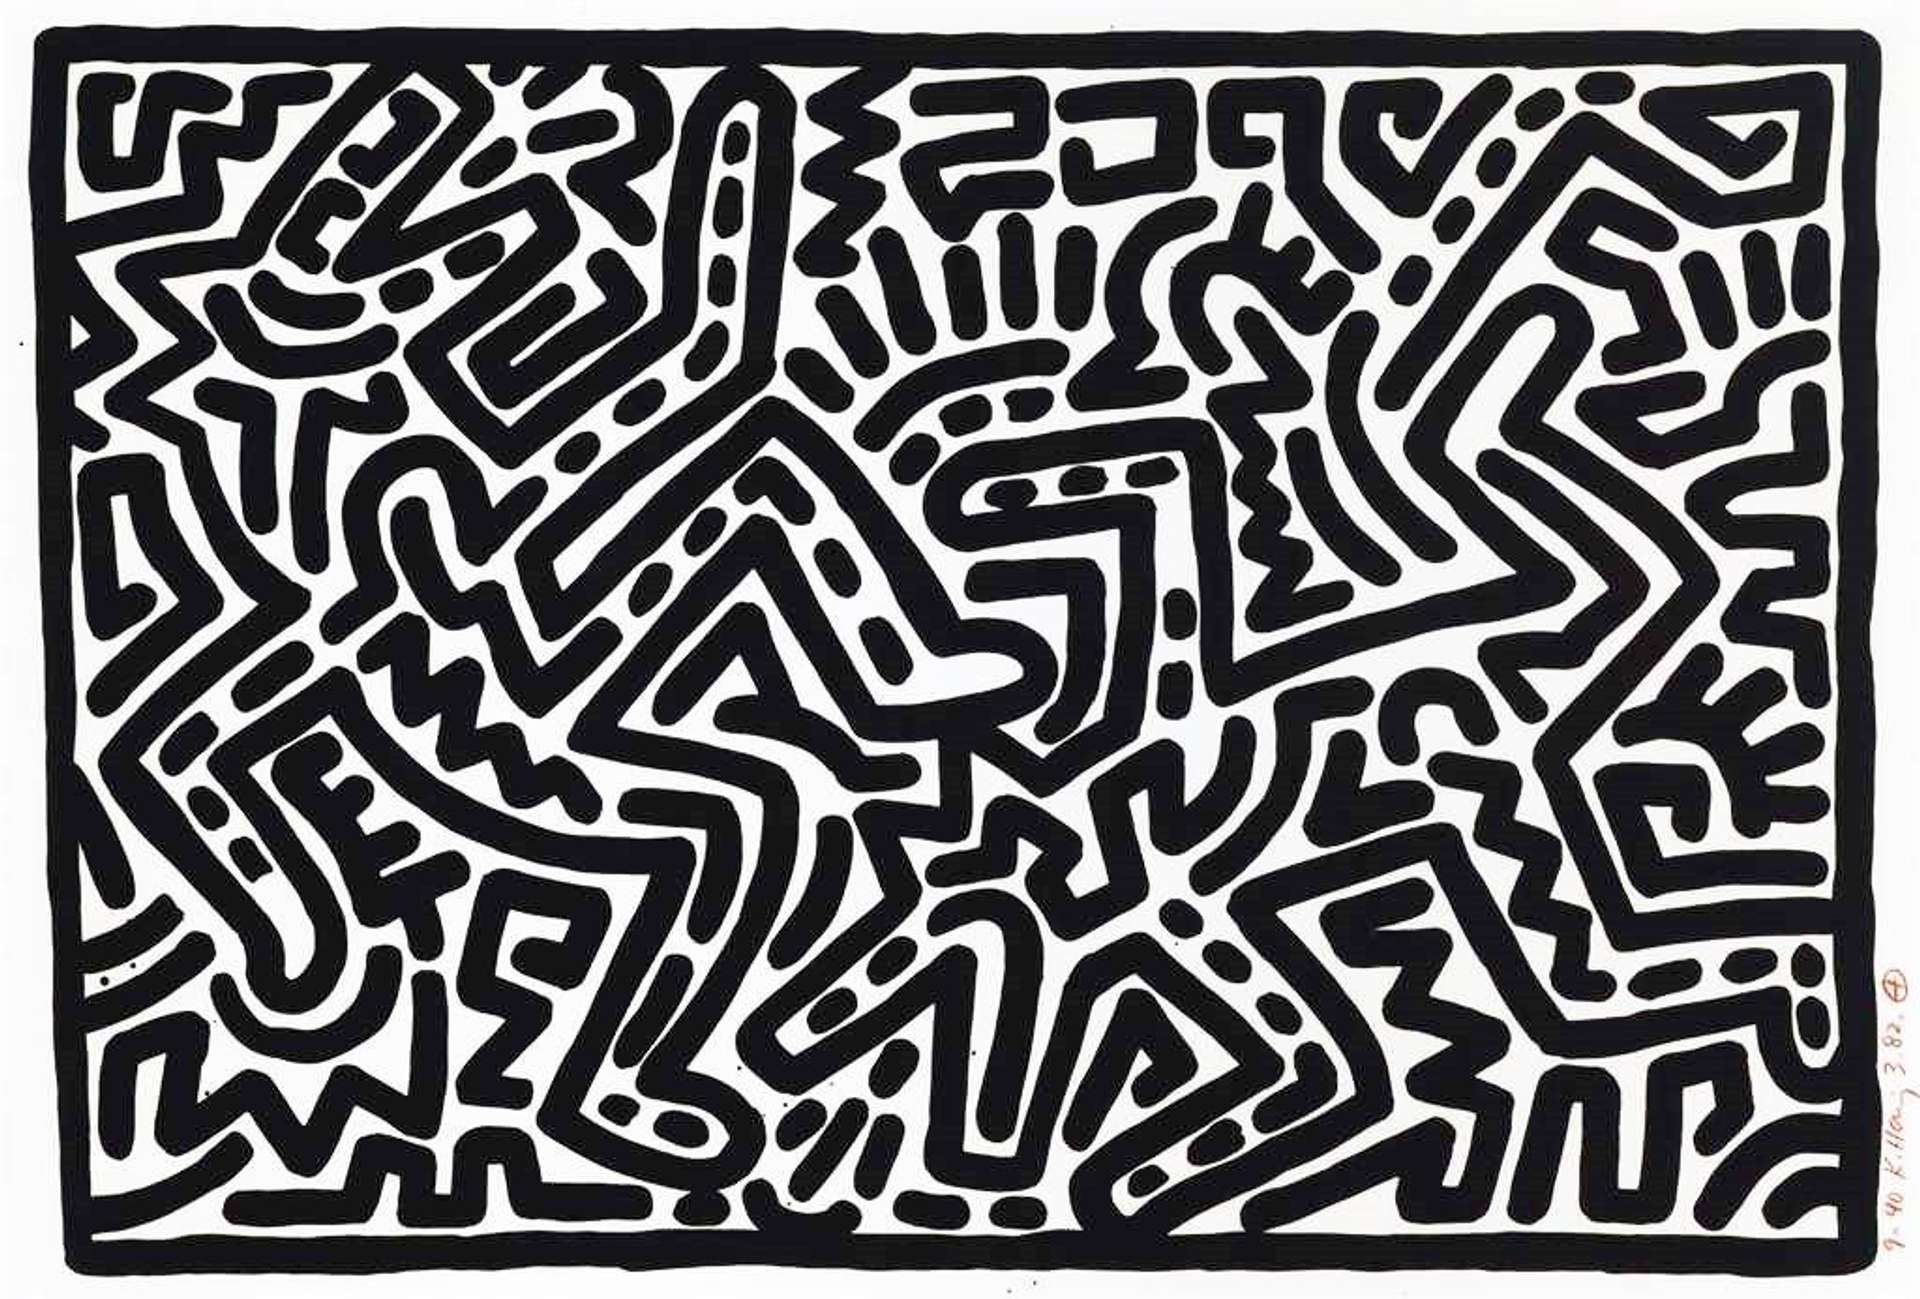 Untitled 1 by Keith Haring